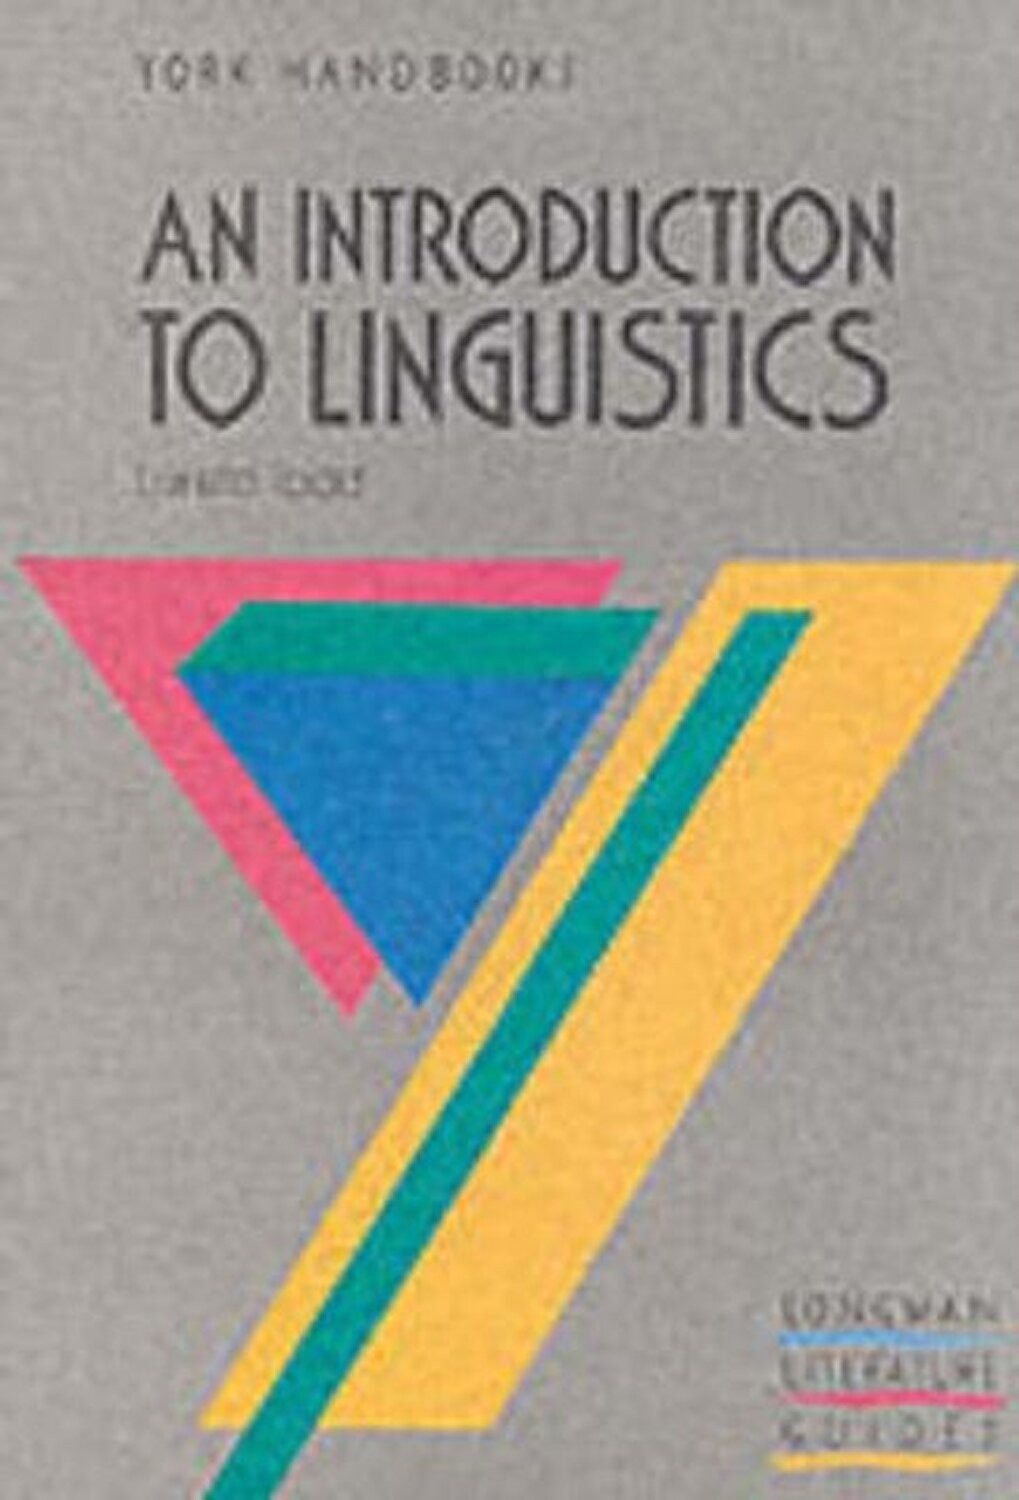 An Introduction to Linguistics